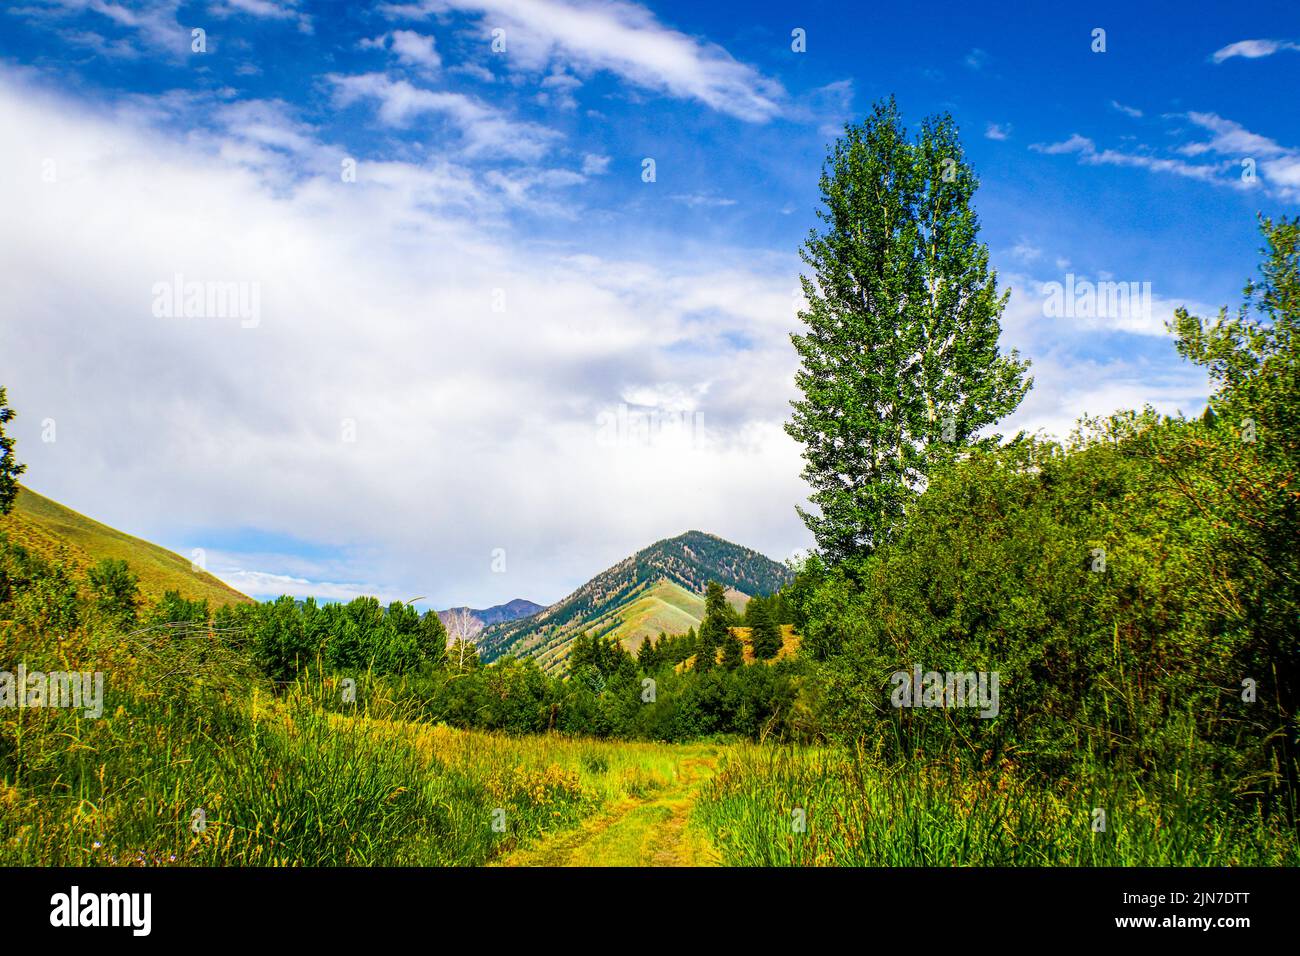 The path not taken - Utah Landscape with meadow trail leading through woods to mountains Stock Photo